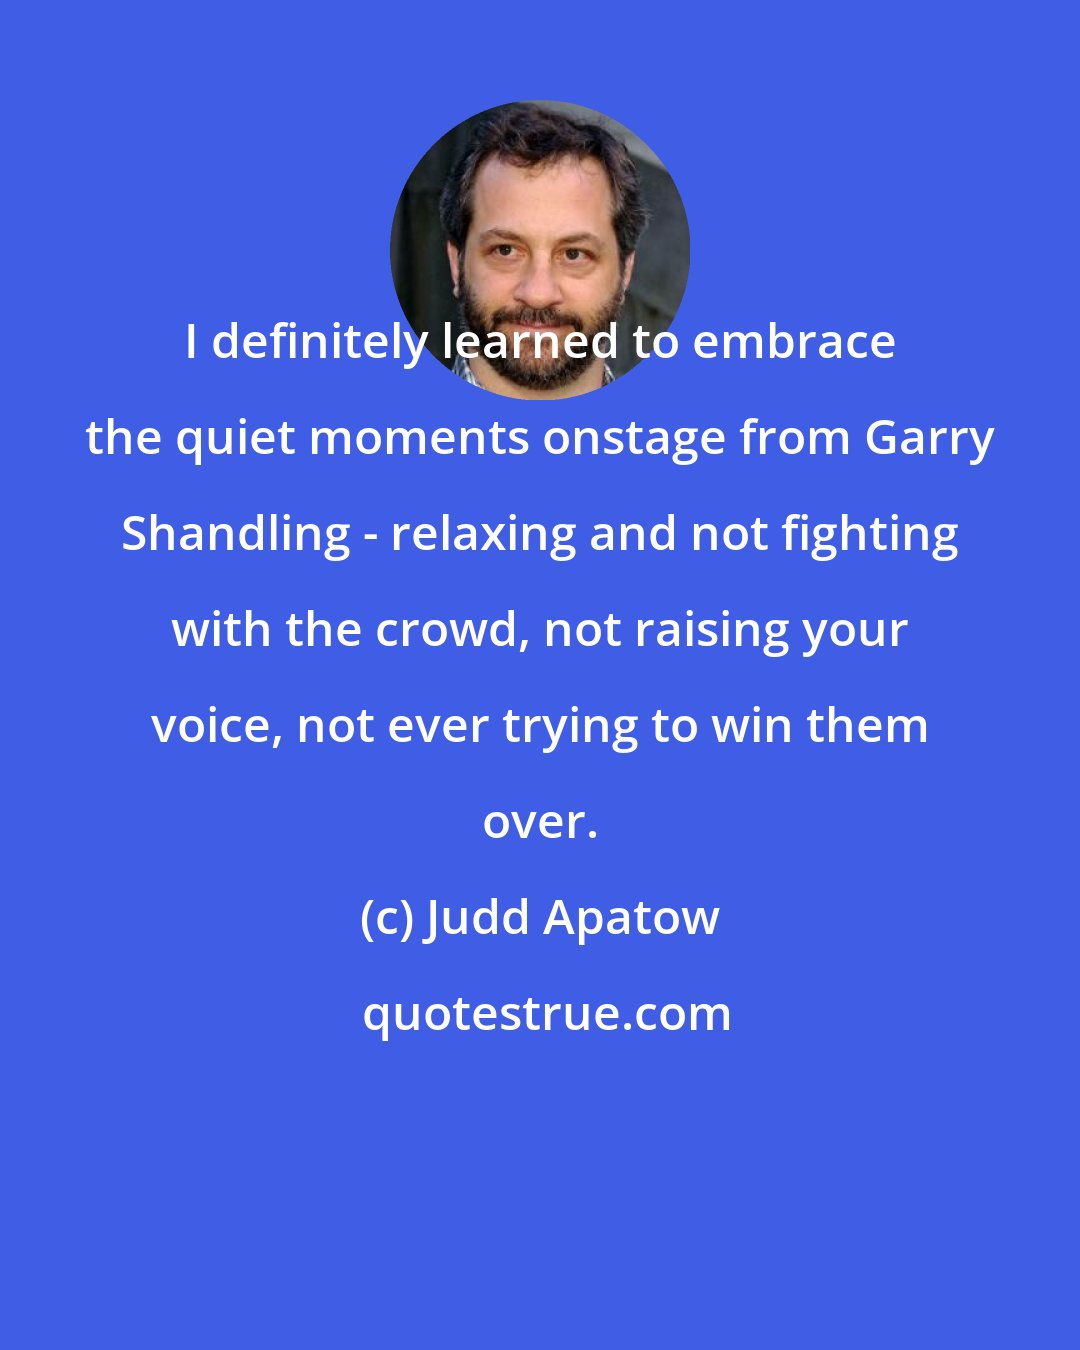 Judd Apatow: I definitely learned to embrace the quiet moments onstage from Garry Shandling - relaxing and not fighting with the crowd, not raising your voice, not ever trying to win them over.